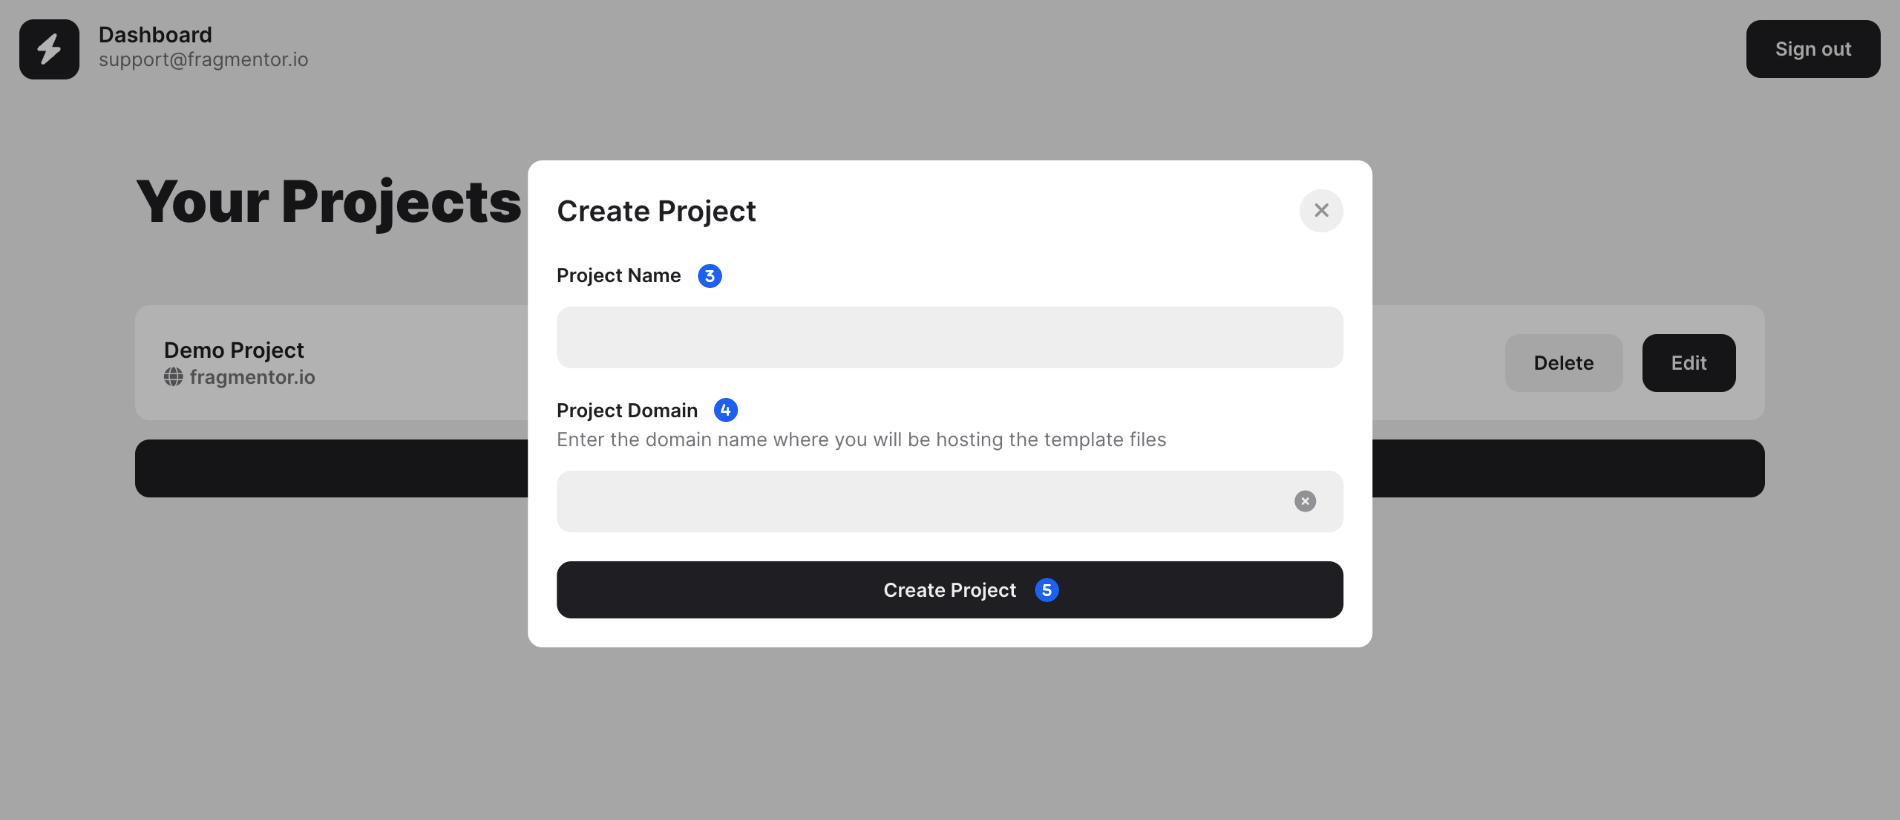 Modal shown upon creating a project